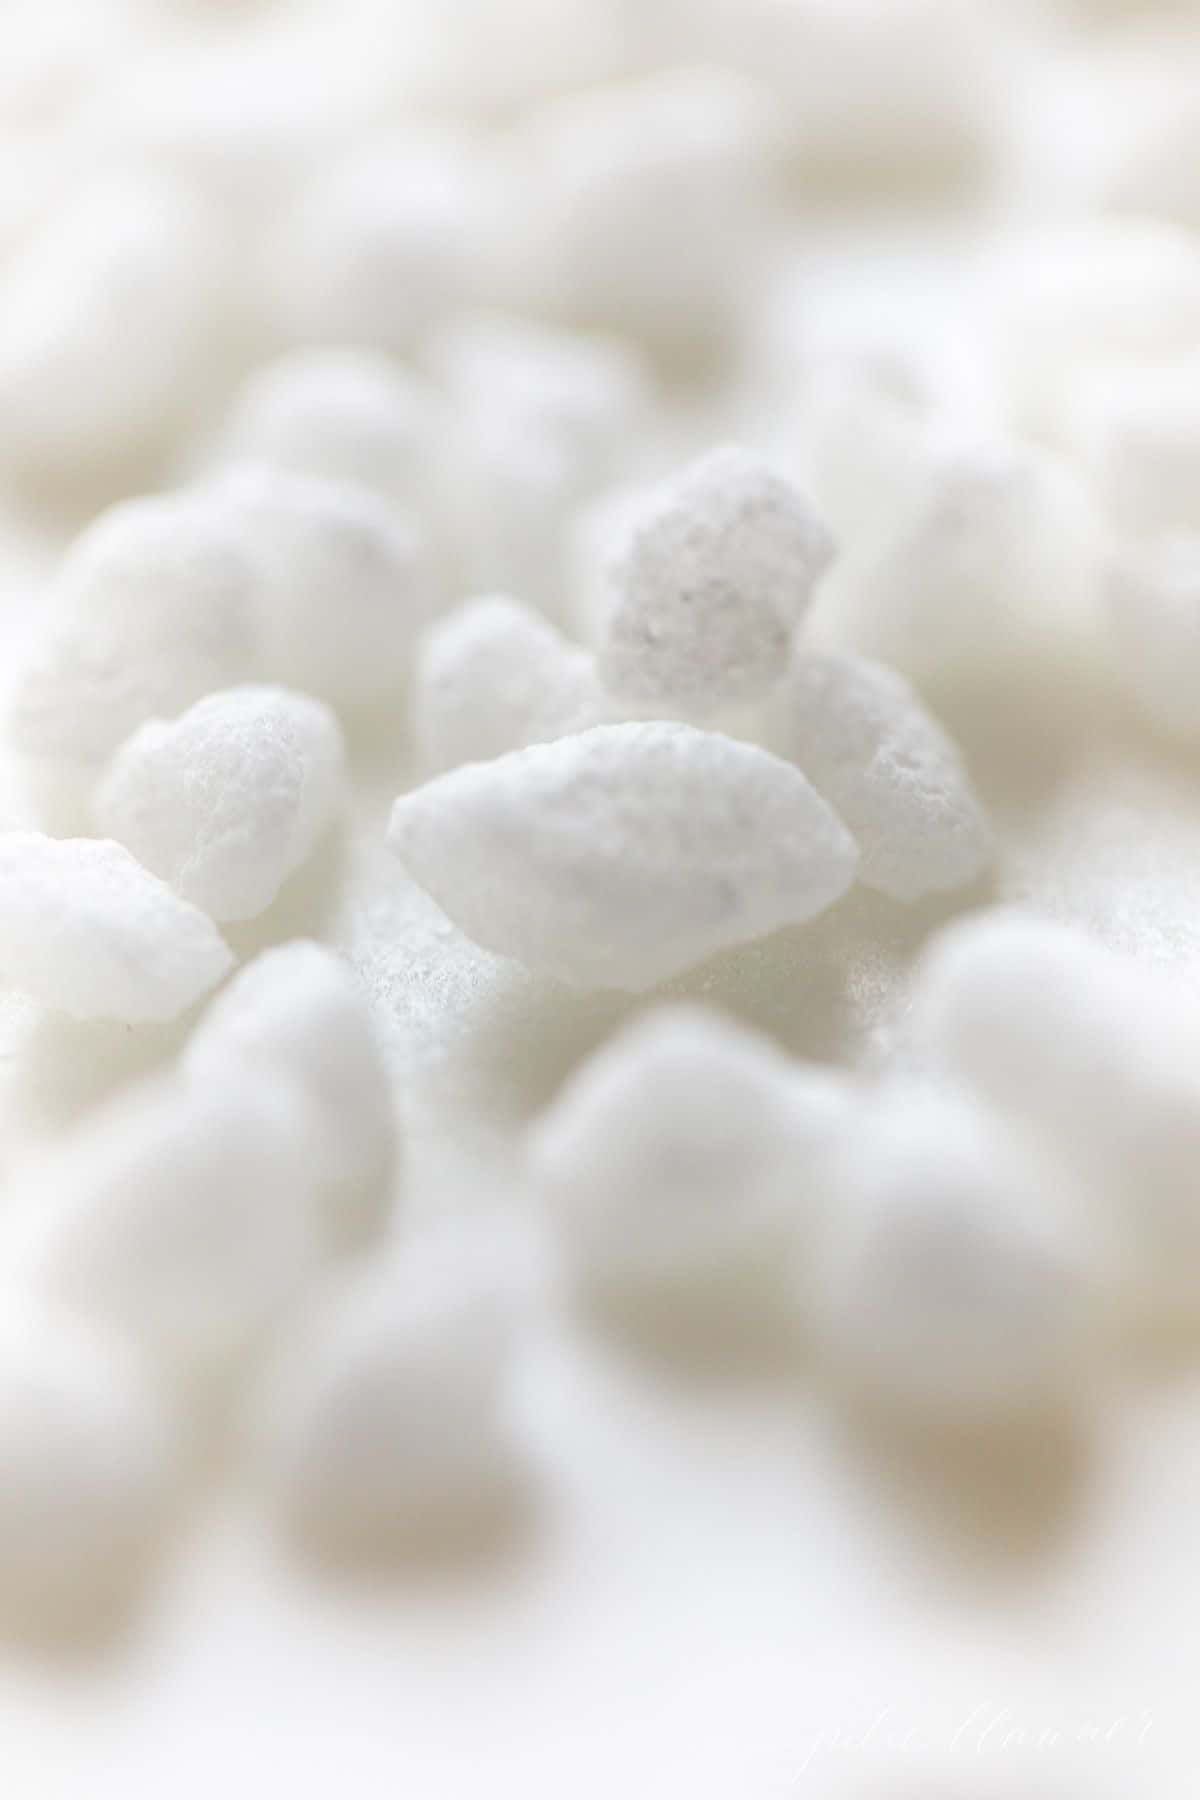 Swedish pearl sugar nibs scattered on a white surface.